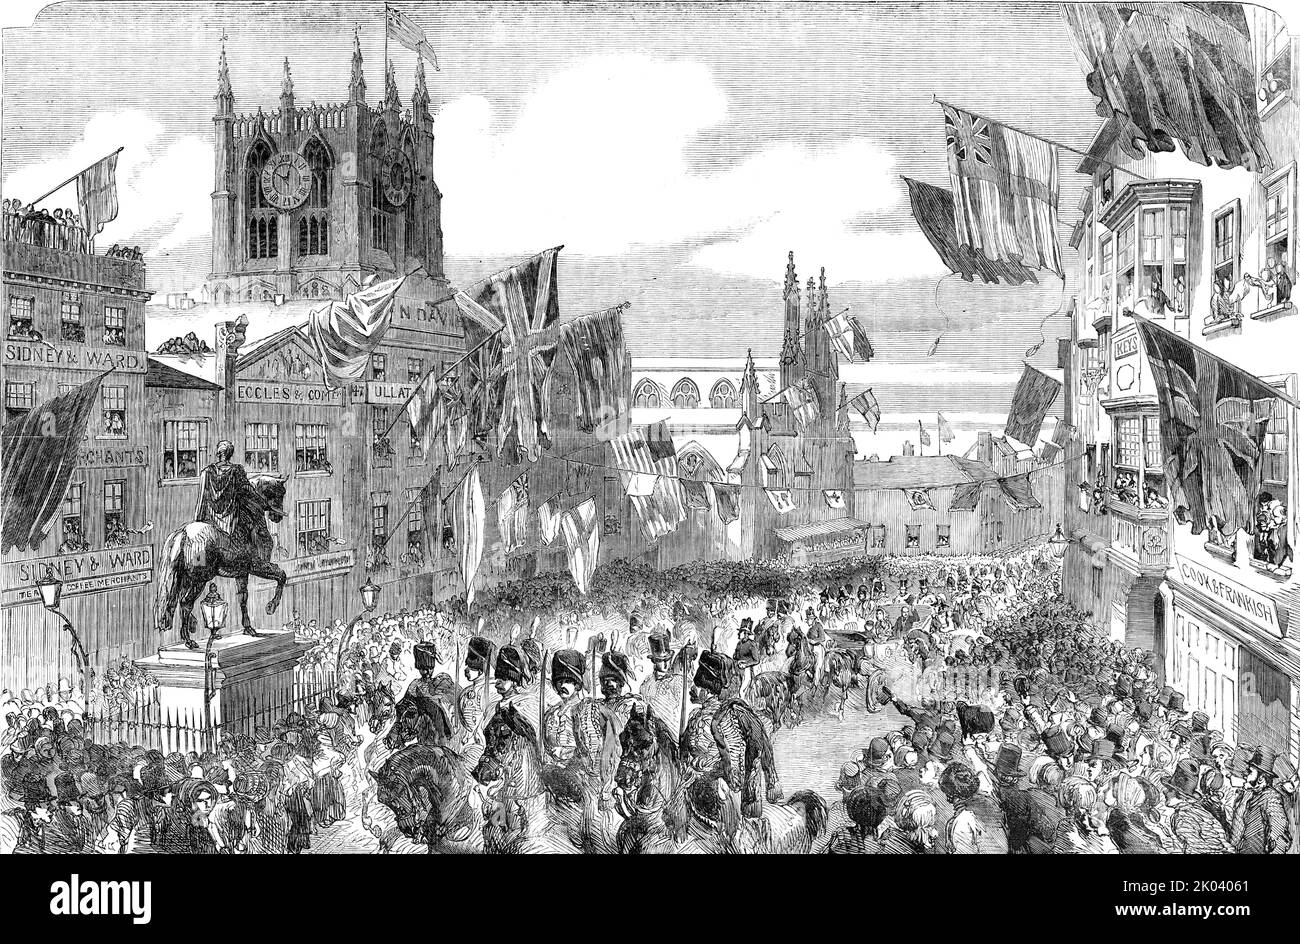 Her Majesty's Visit to Hull - the Procession in the Market-Place, 1854. Queen Victoria visits Yorkshire. 'The inhabitants testified their loyal devotion by an illumination so general, that, along whole lines of streets, scarcely a house could be seen which had not a device of some kind or other. The chief display was in the Market-place and in Whitefriargate, where triumphal arches blazed with light, and the Wilberforce monument and the gilded statue of King William III. were thrown into bold relief. A very pretty effect was produced by lighting up from the interior the stained-glass window of Stock Photo